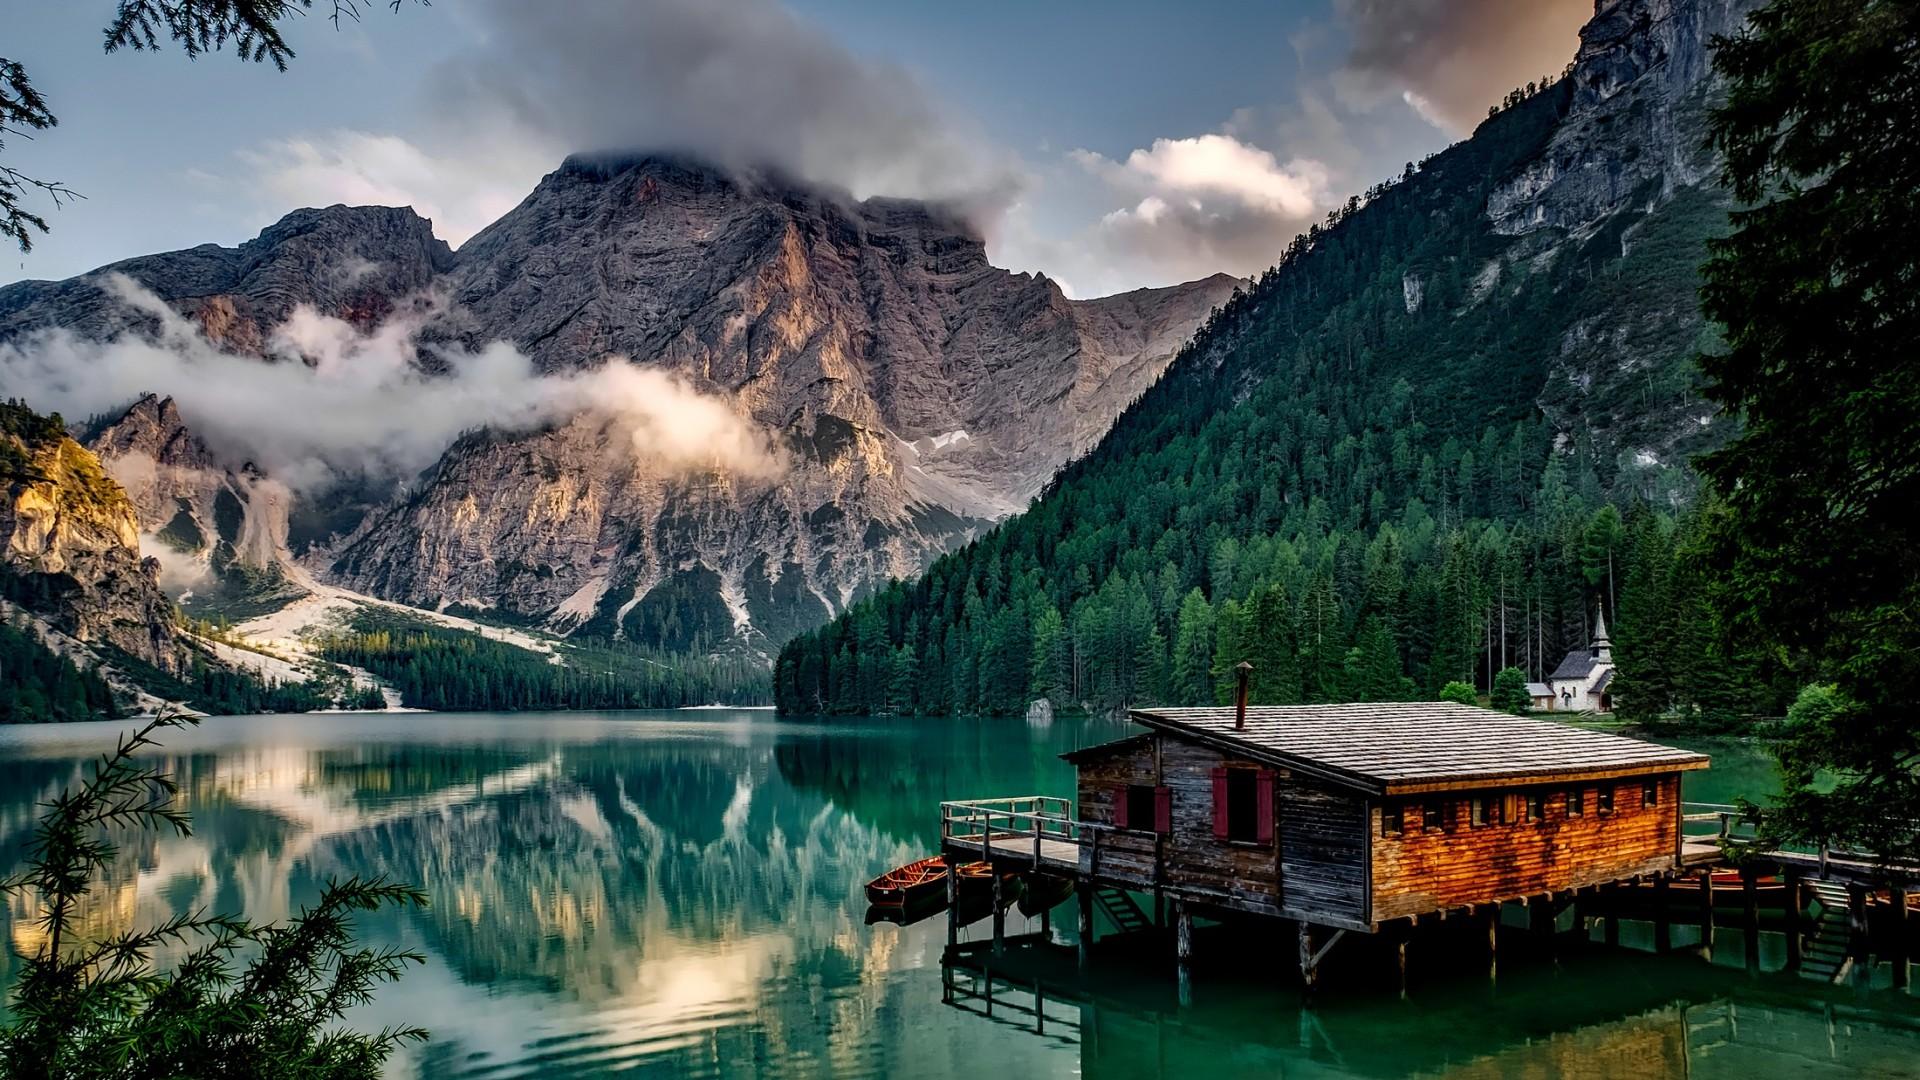 #building, #clouds, #landscape, #Italy, #boat, #house